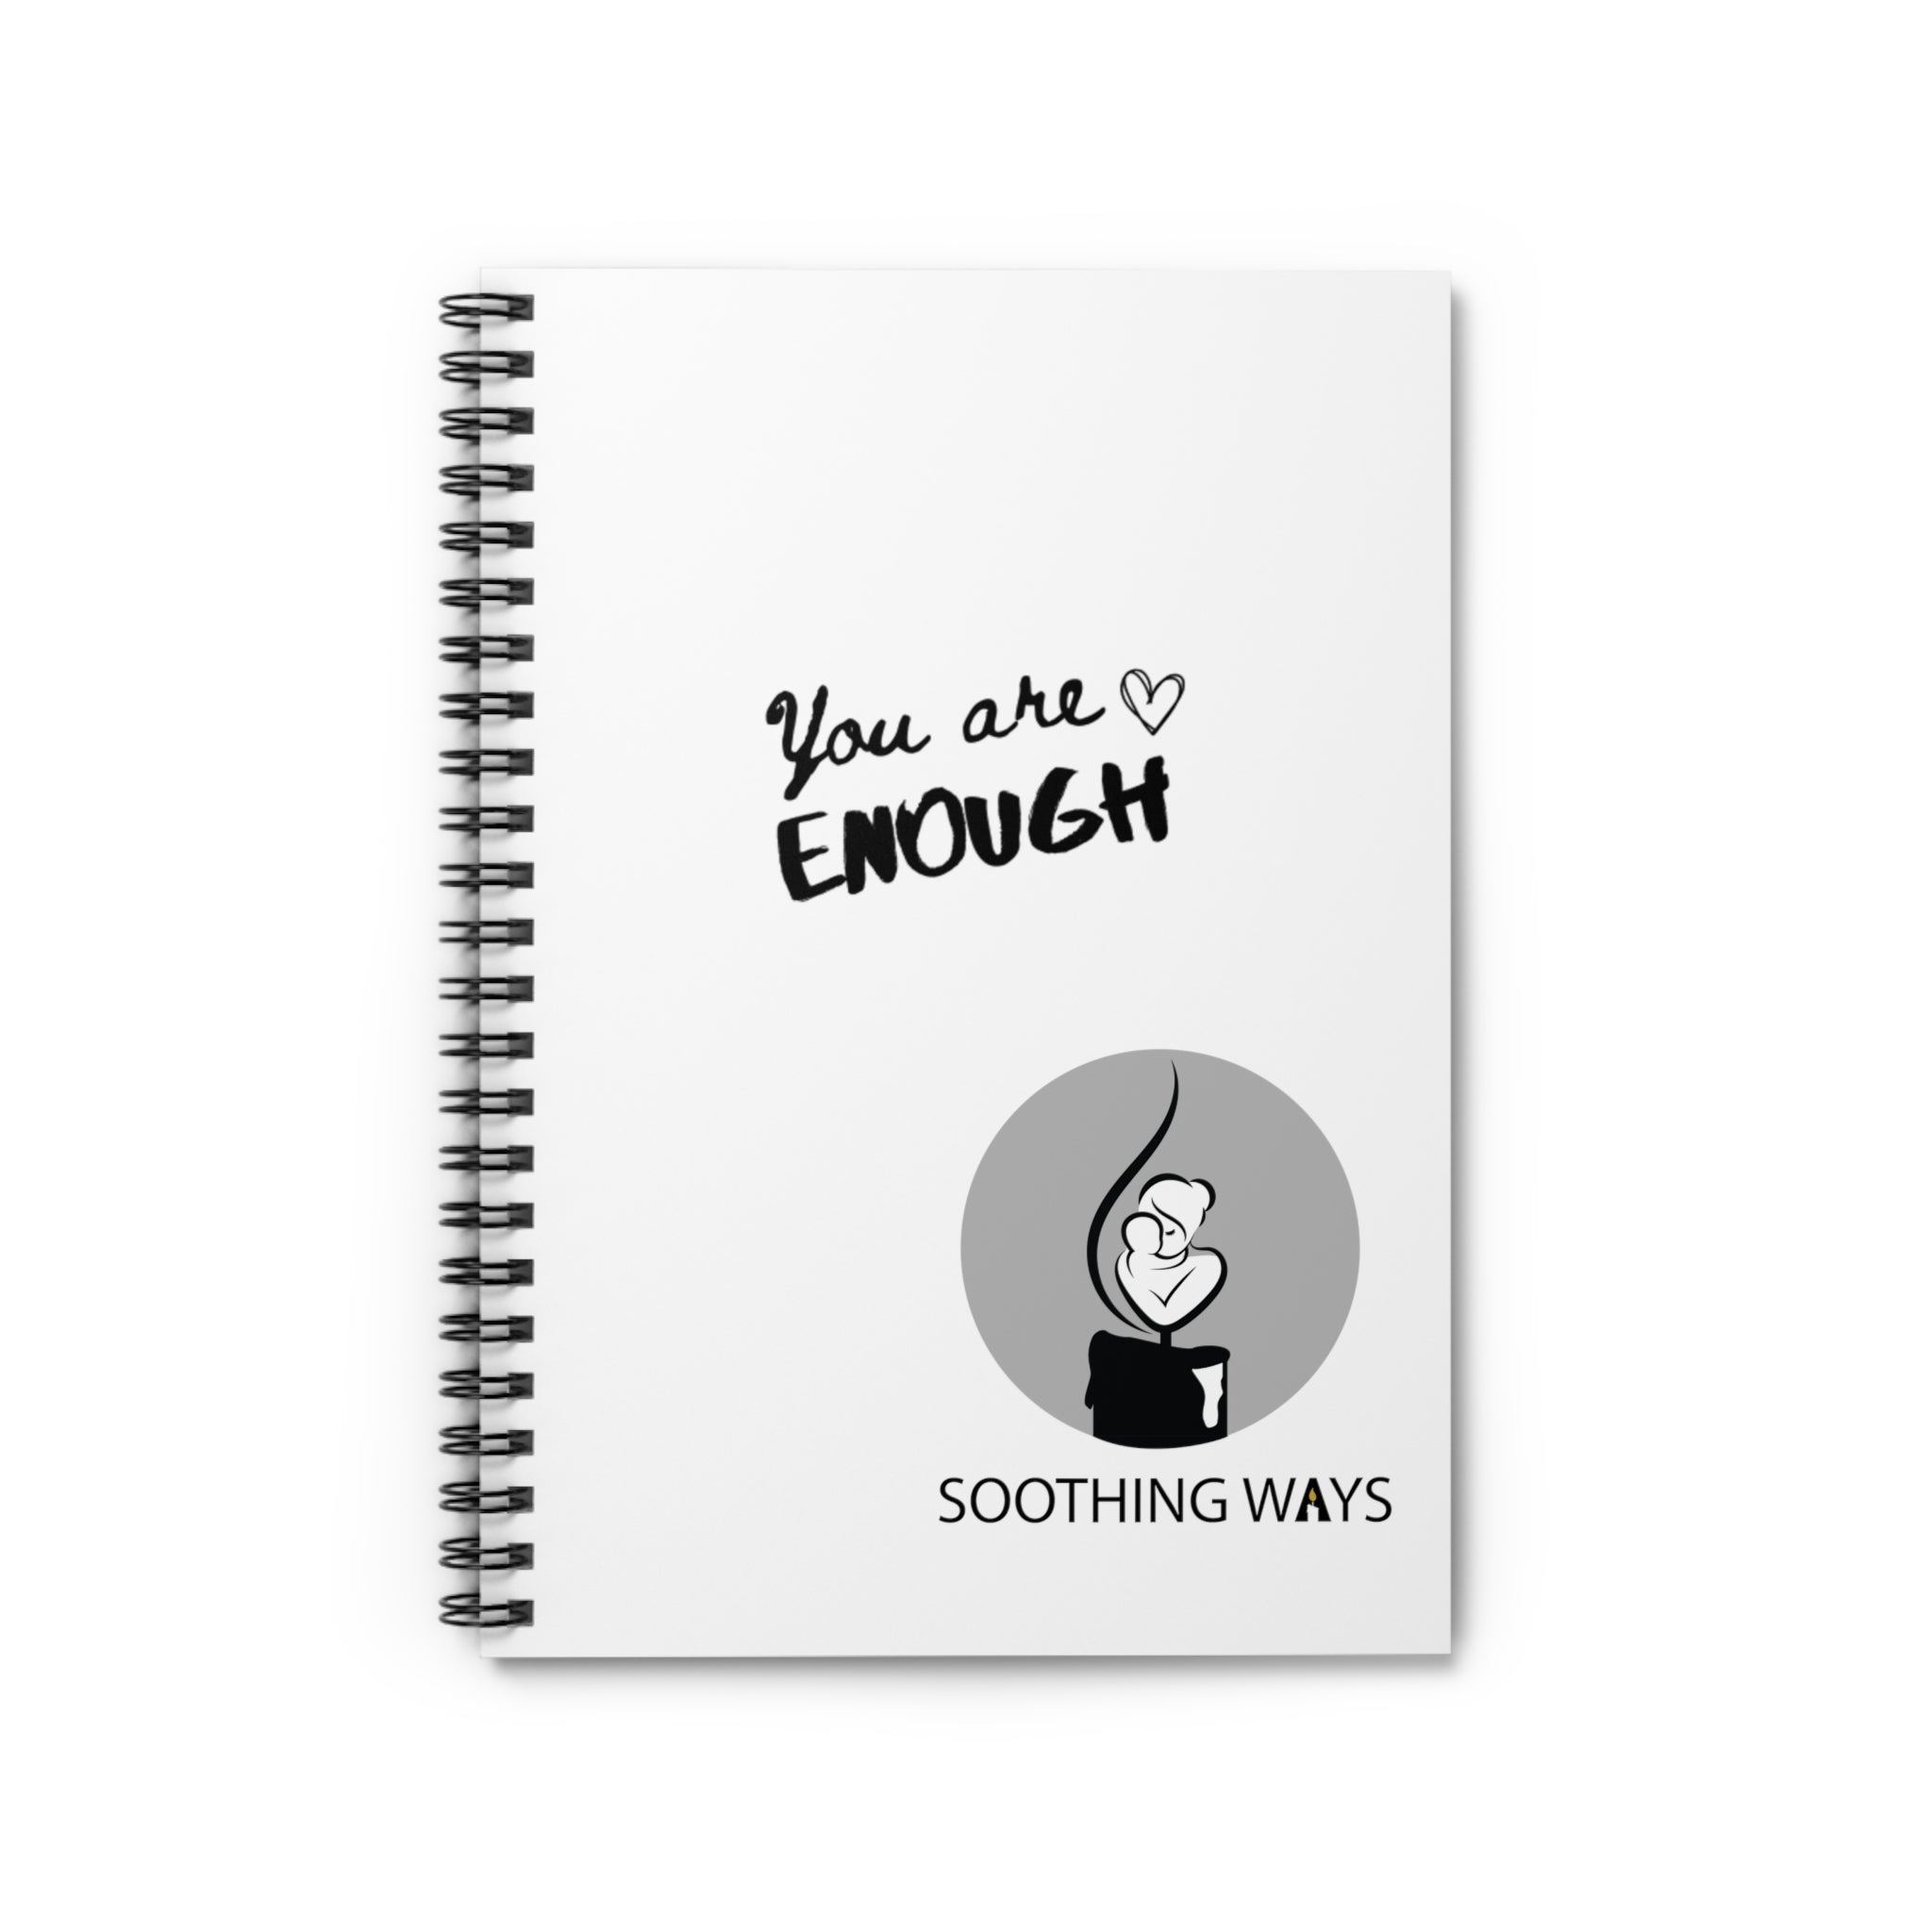 Soothing Ways Notebook/Journal - Soothing Ways